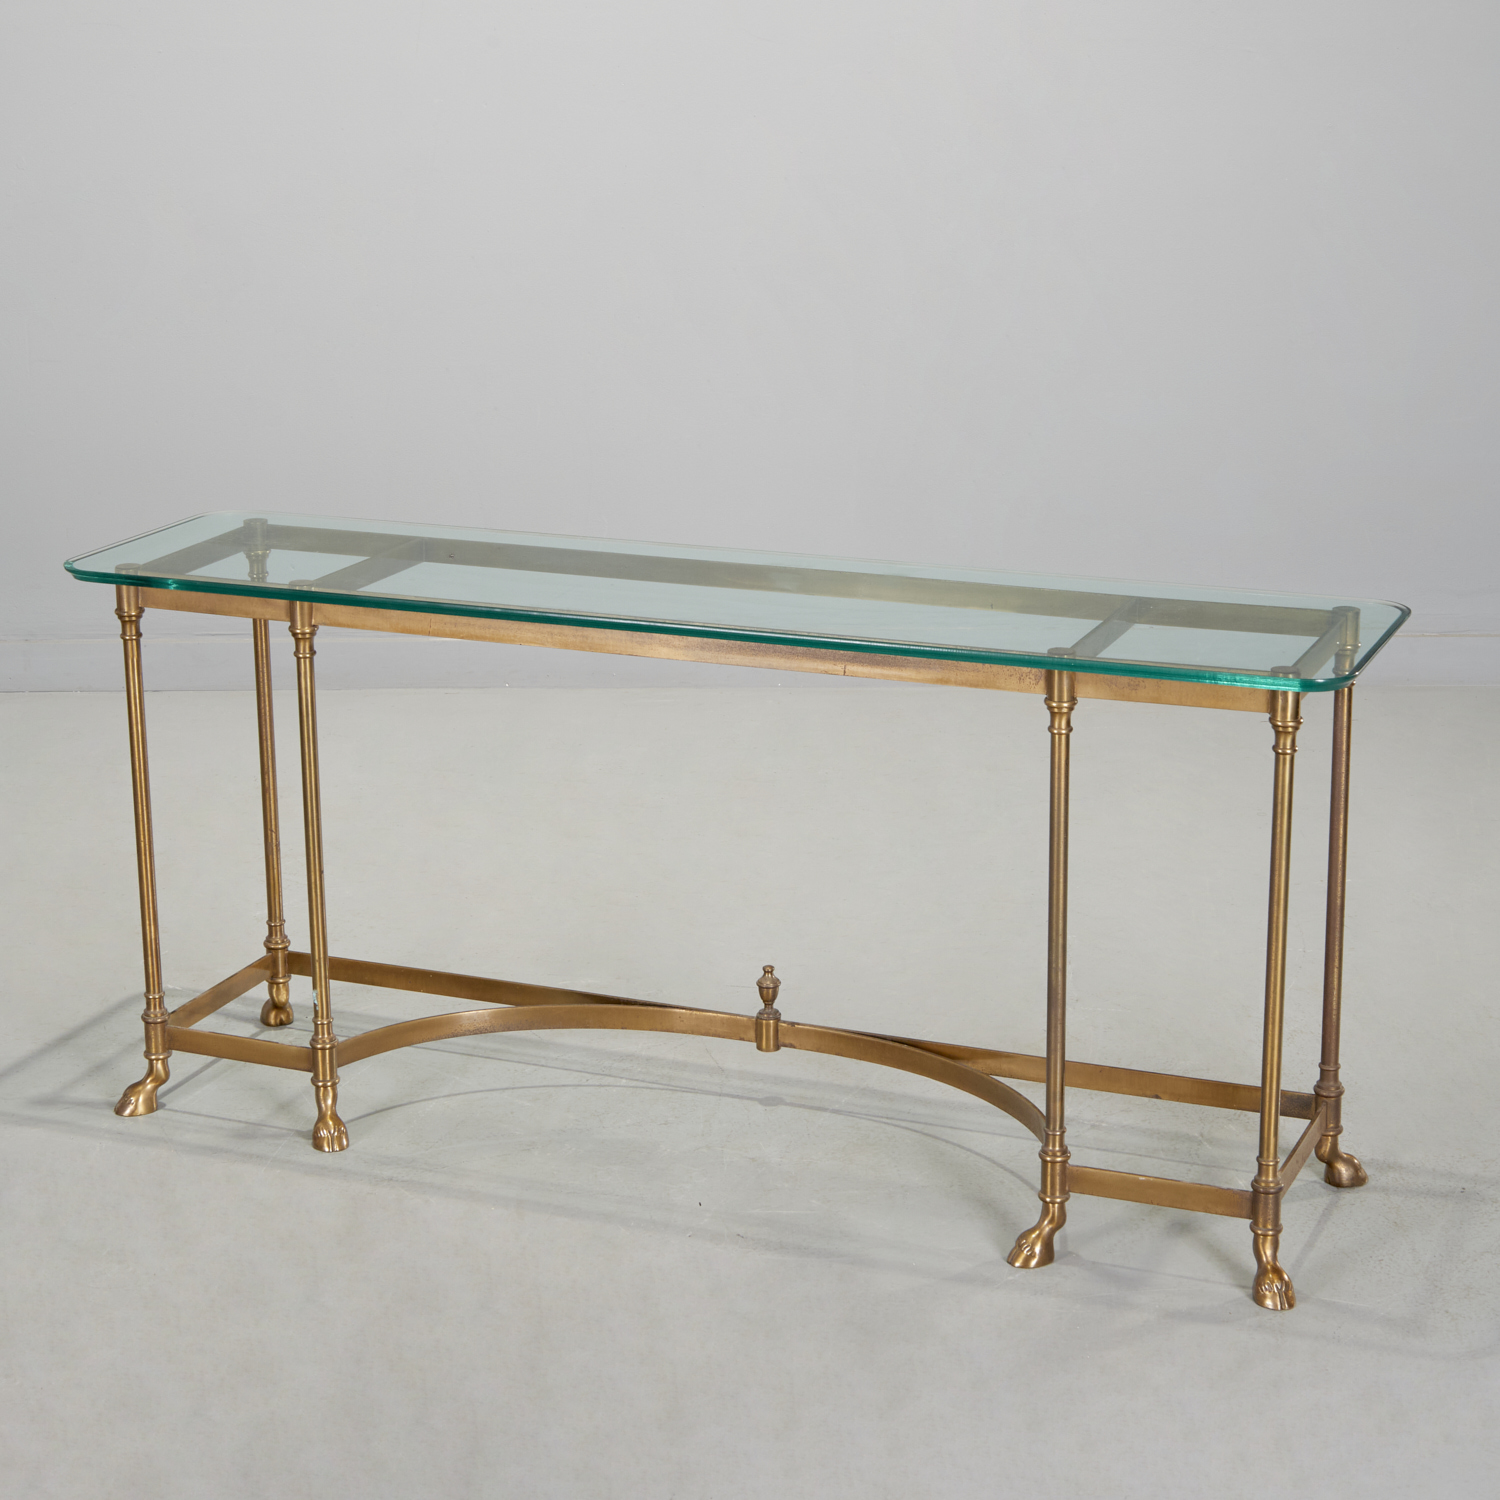 LABARGE BRASS AND GLASS CONSOLE